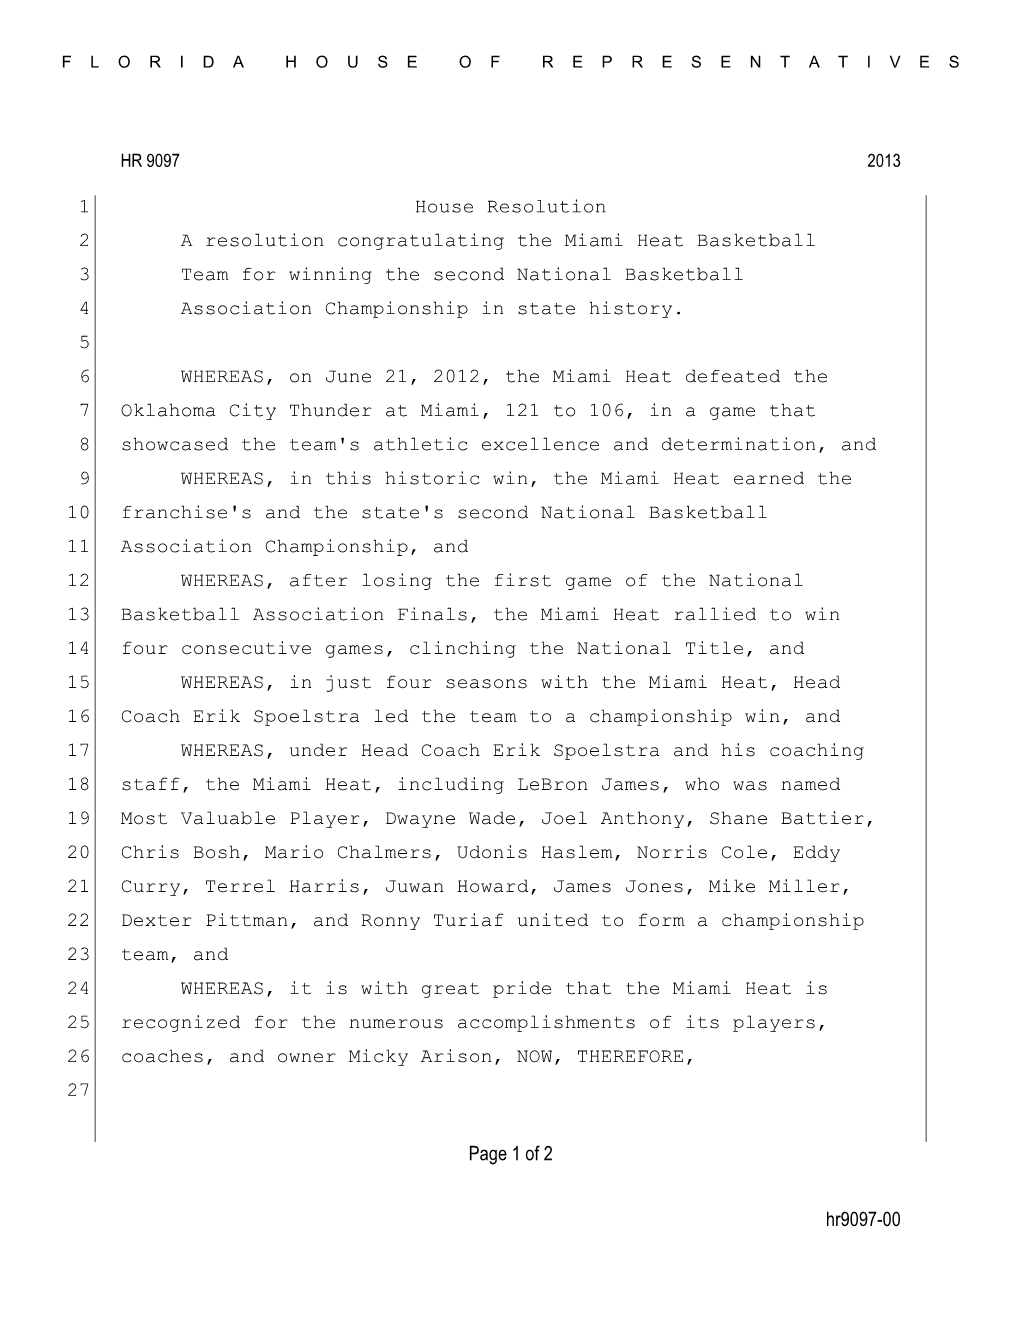 Hr9097-00 Page 1 of 2 House Resolution 1 A